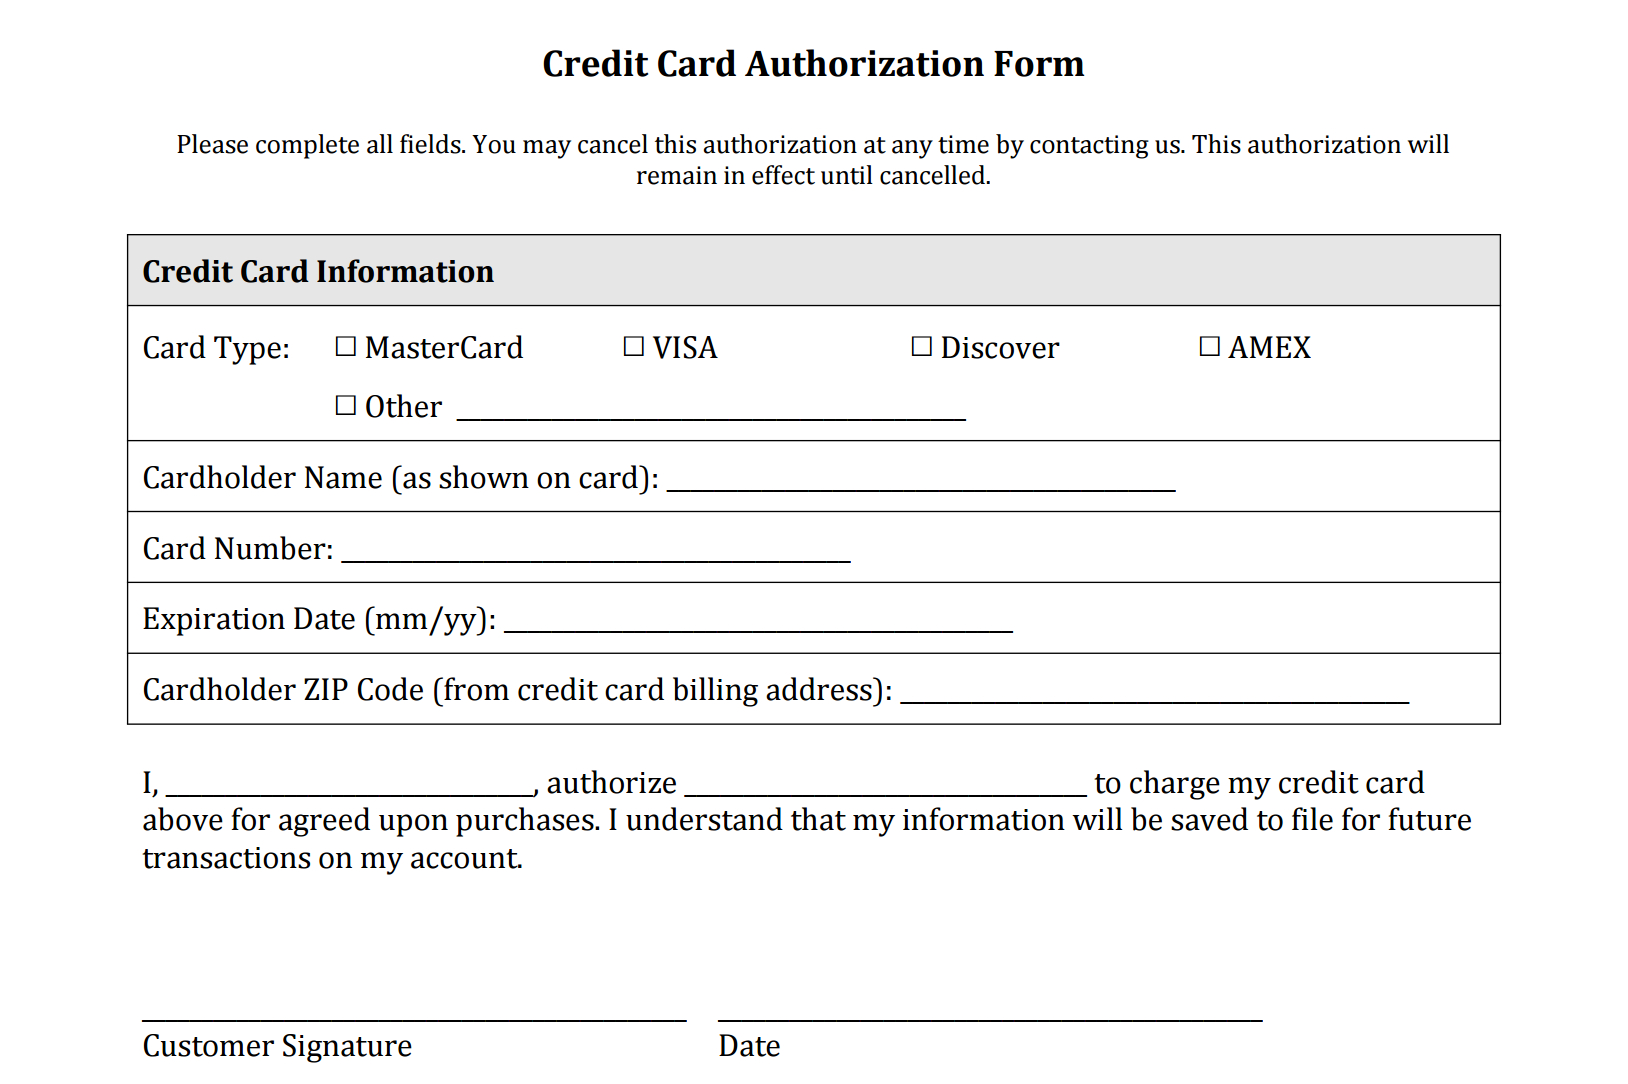 Credit Card Authorization Form Templates Download regarding Credit Card Billing Authorization Form Template